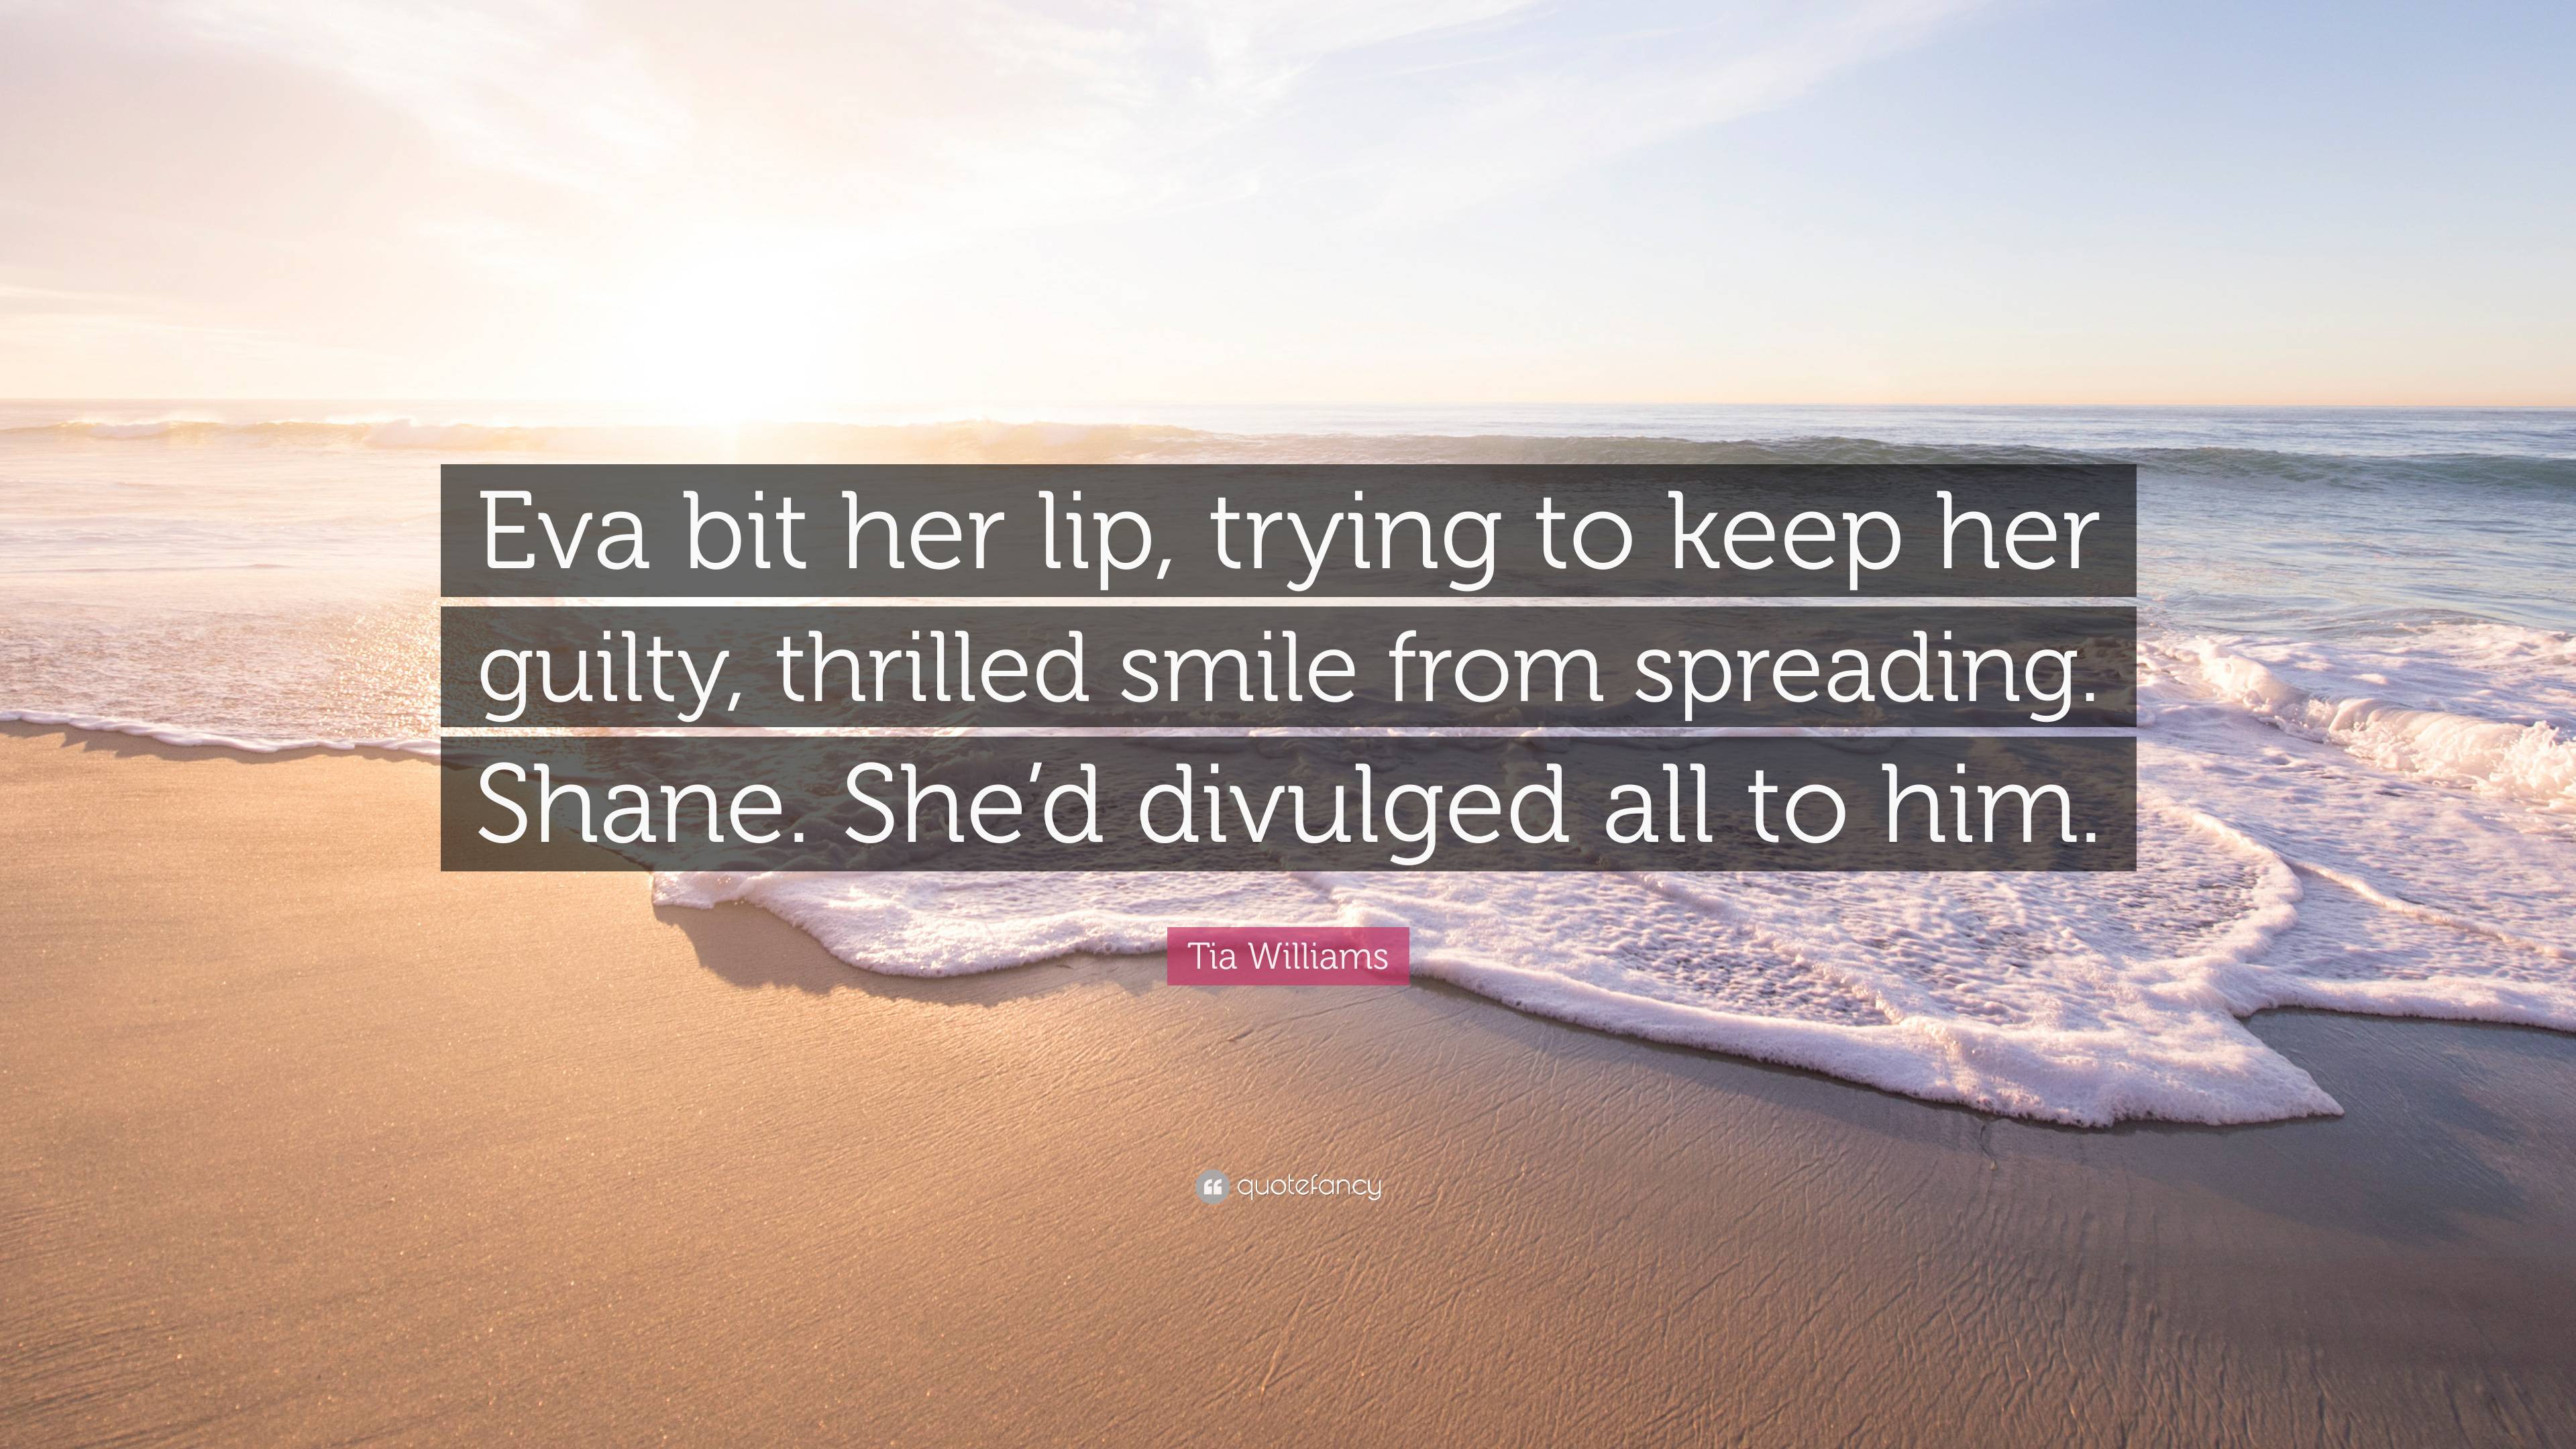 Tia Williams Quote: “Eva bit her lip, trying to keep her guilty ...